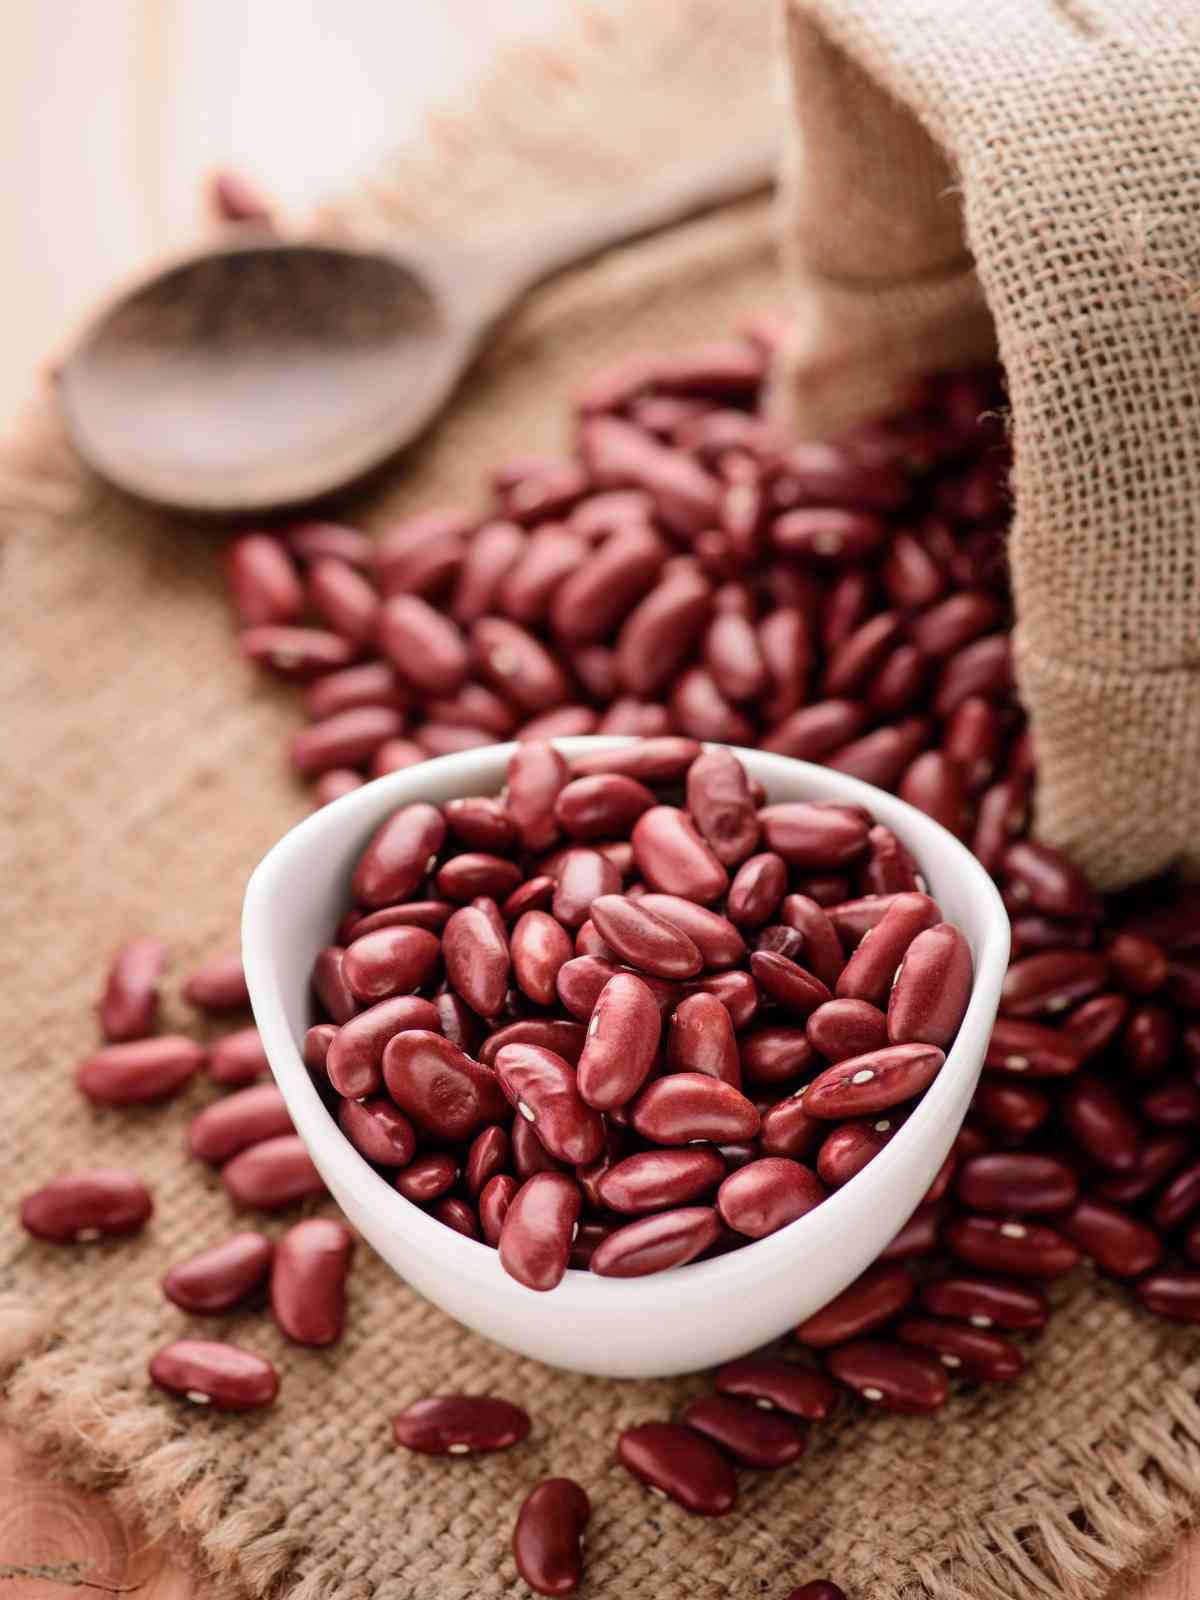 Kidney beans placed in a bowl.